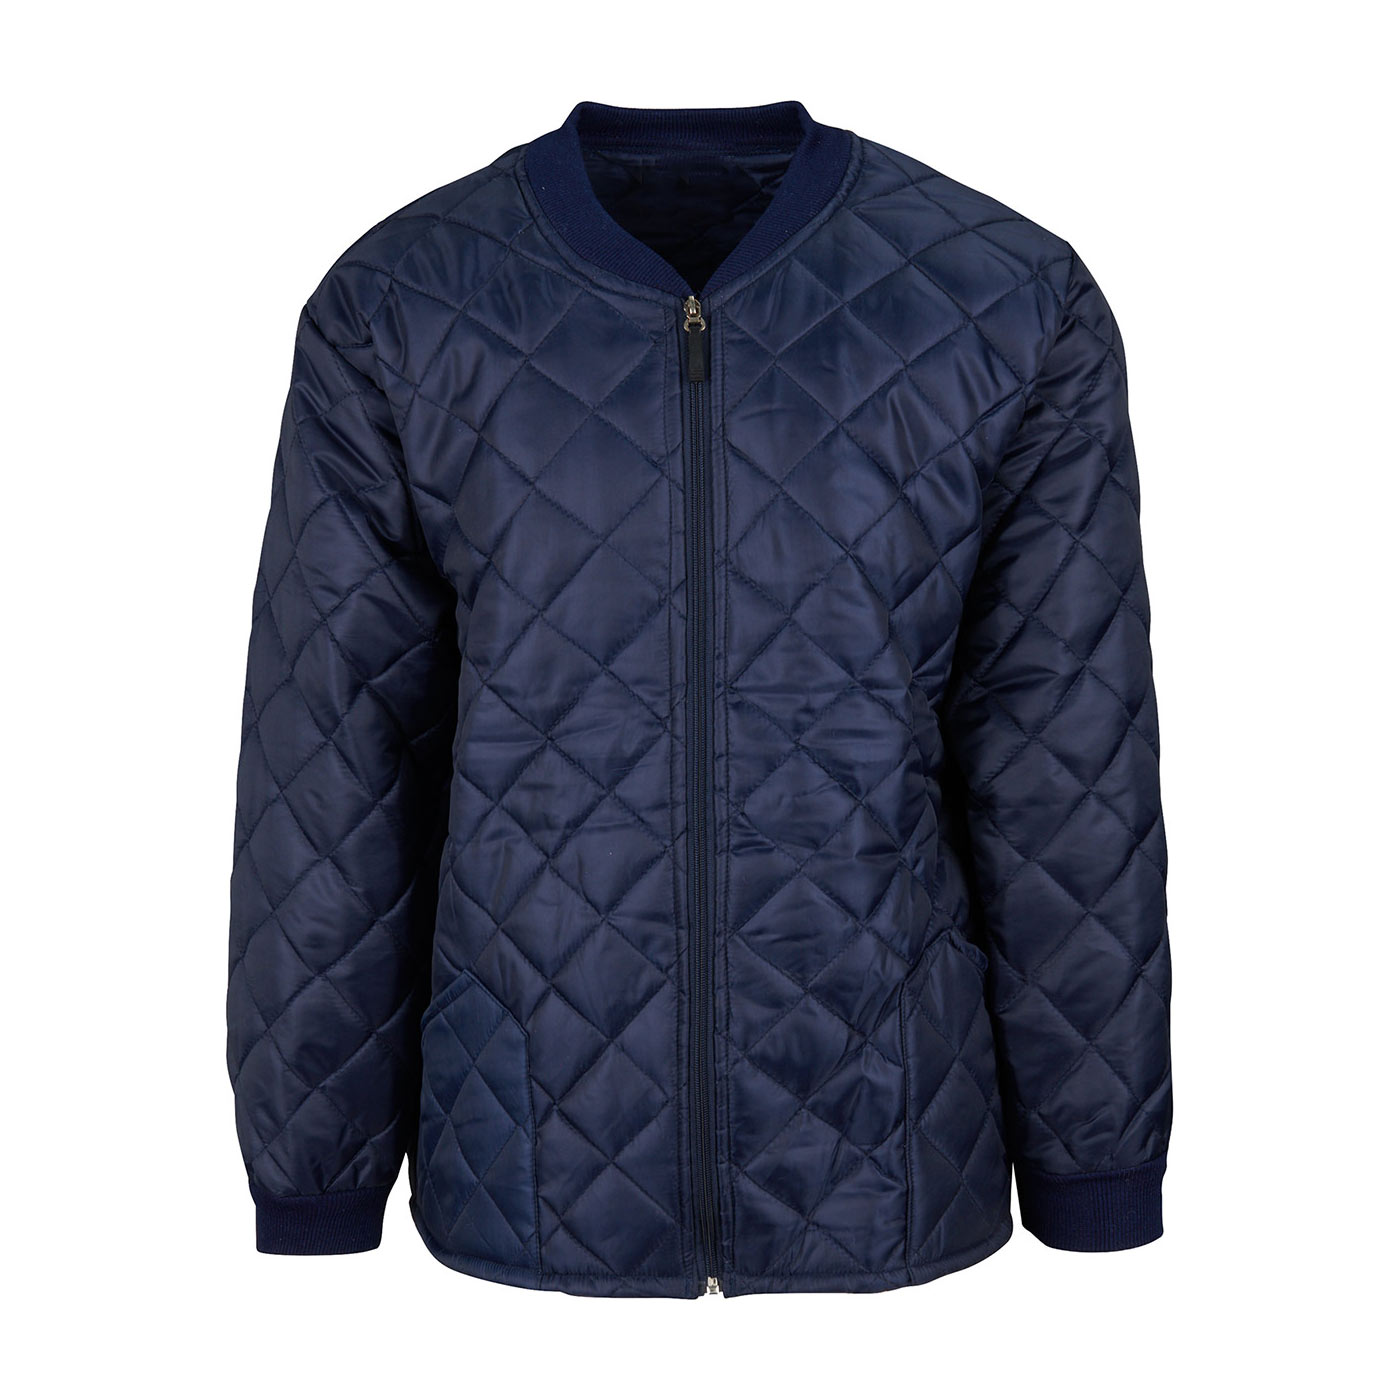 MENS NAVY DIAMOND Quilted Zip Up Casual Work Thermal Jacket Coat Size S ...